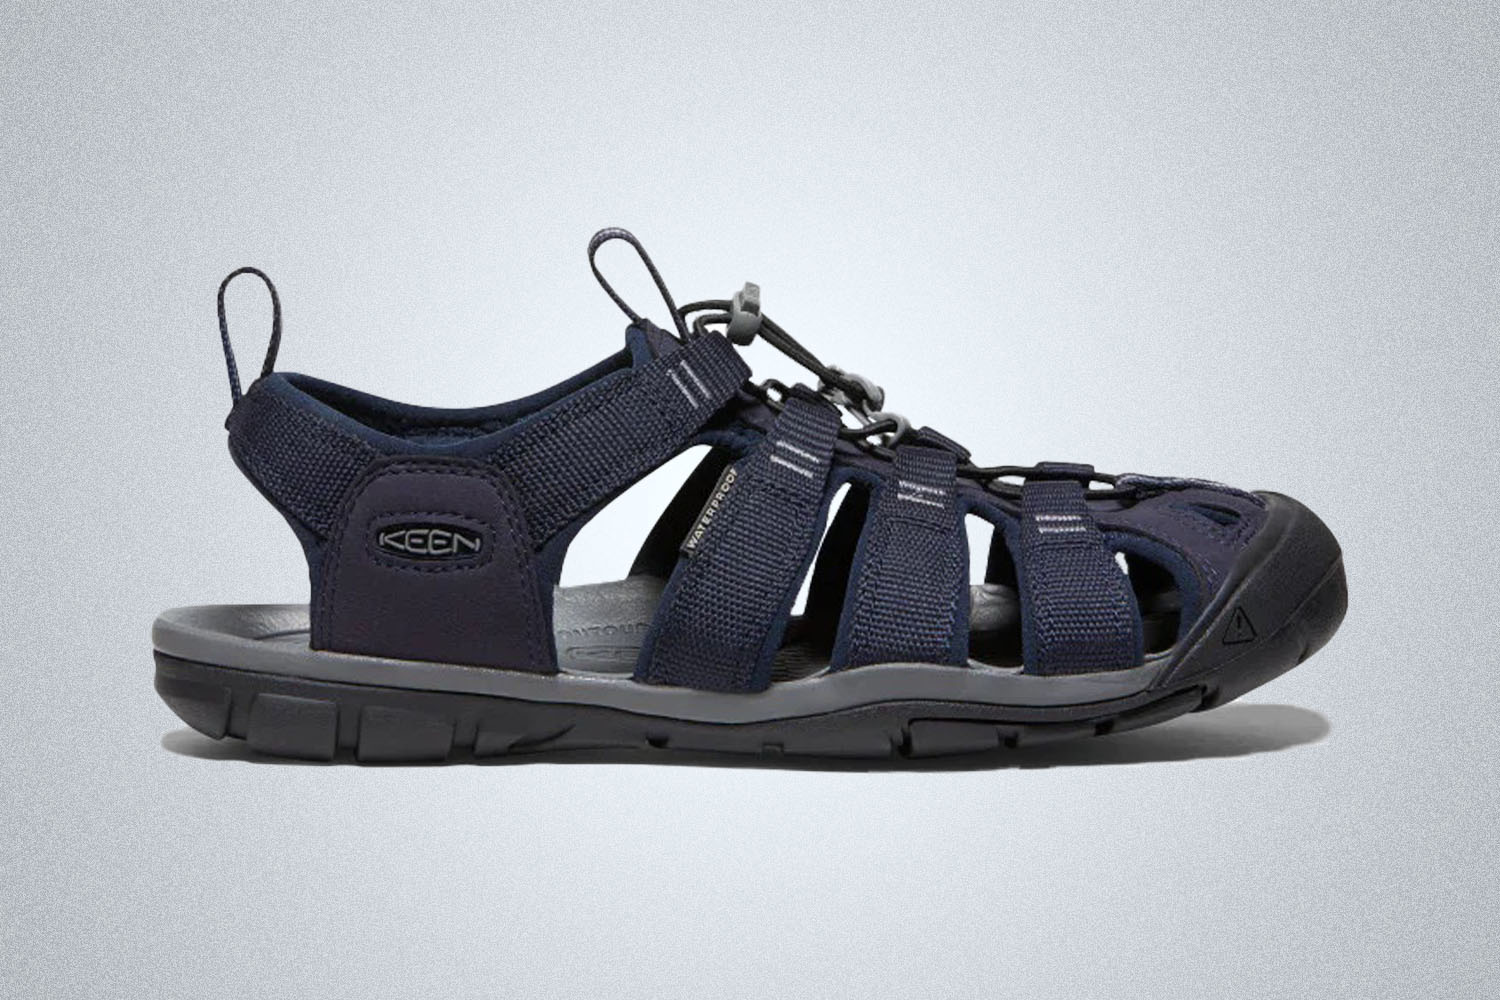 Best Water Hiking Sandals: Keen Clearwater CNX Sandals